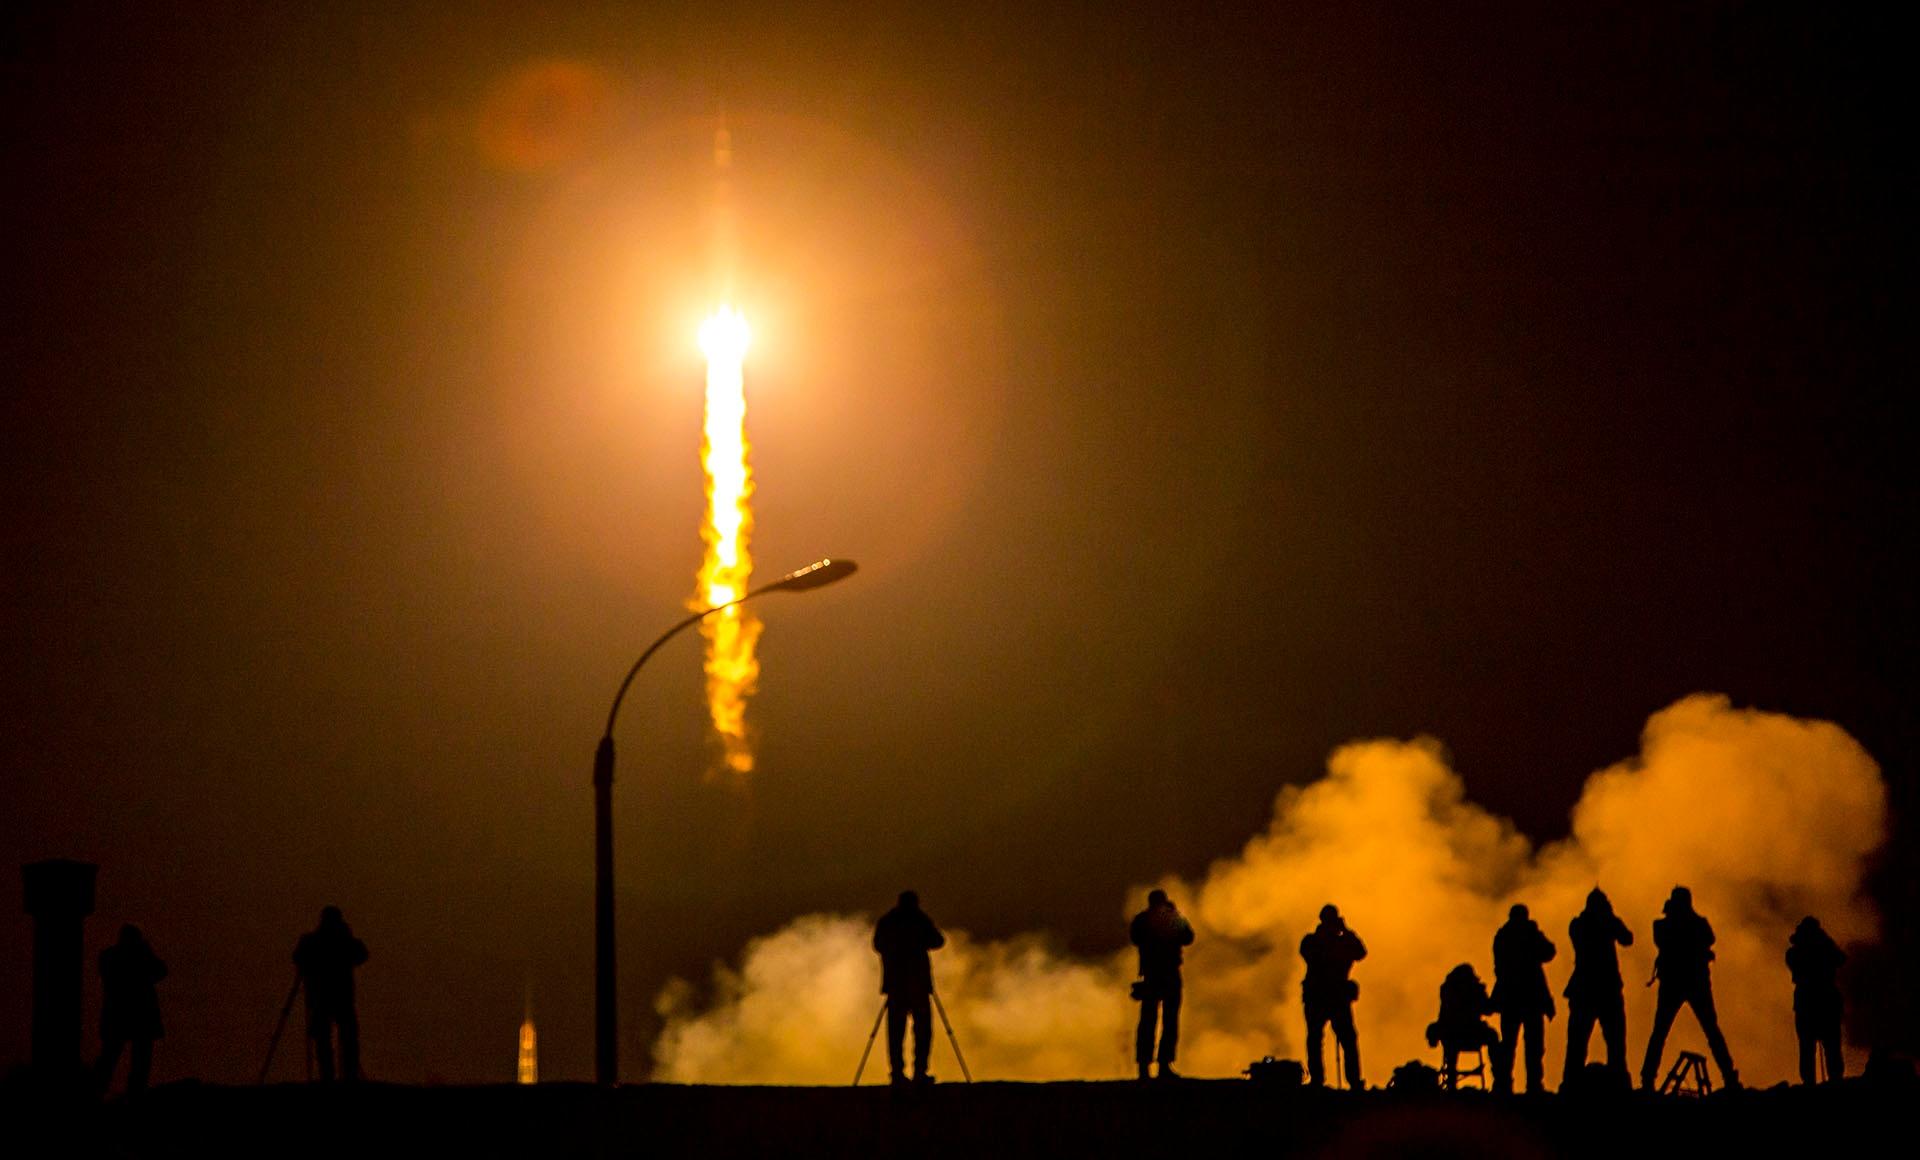 Photographers capture the moment as astronauts begin the Year in Space mission.